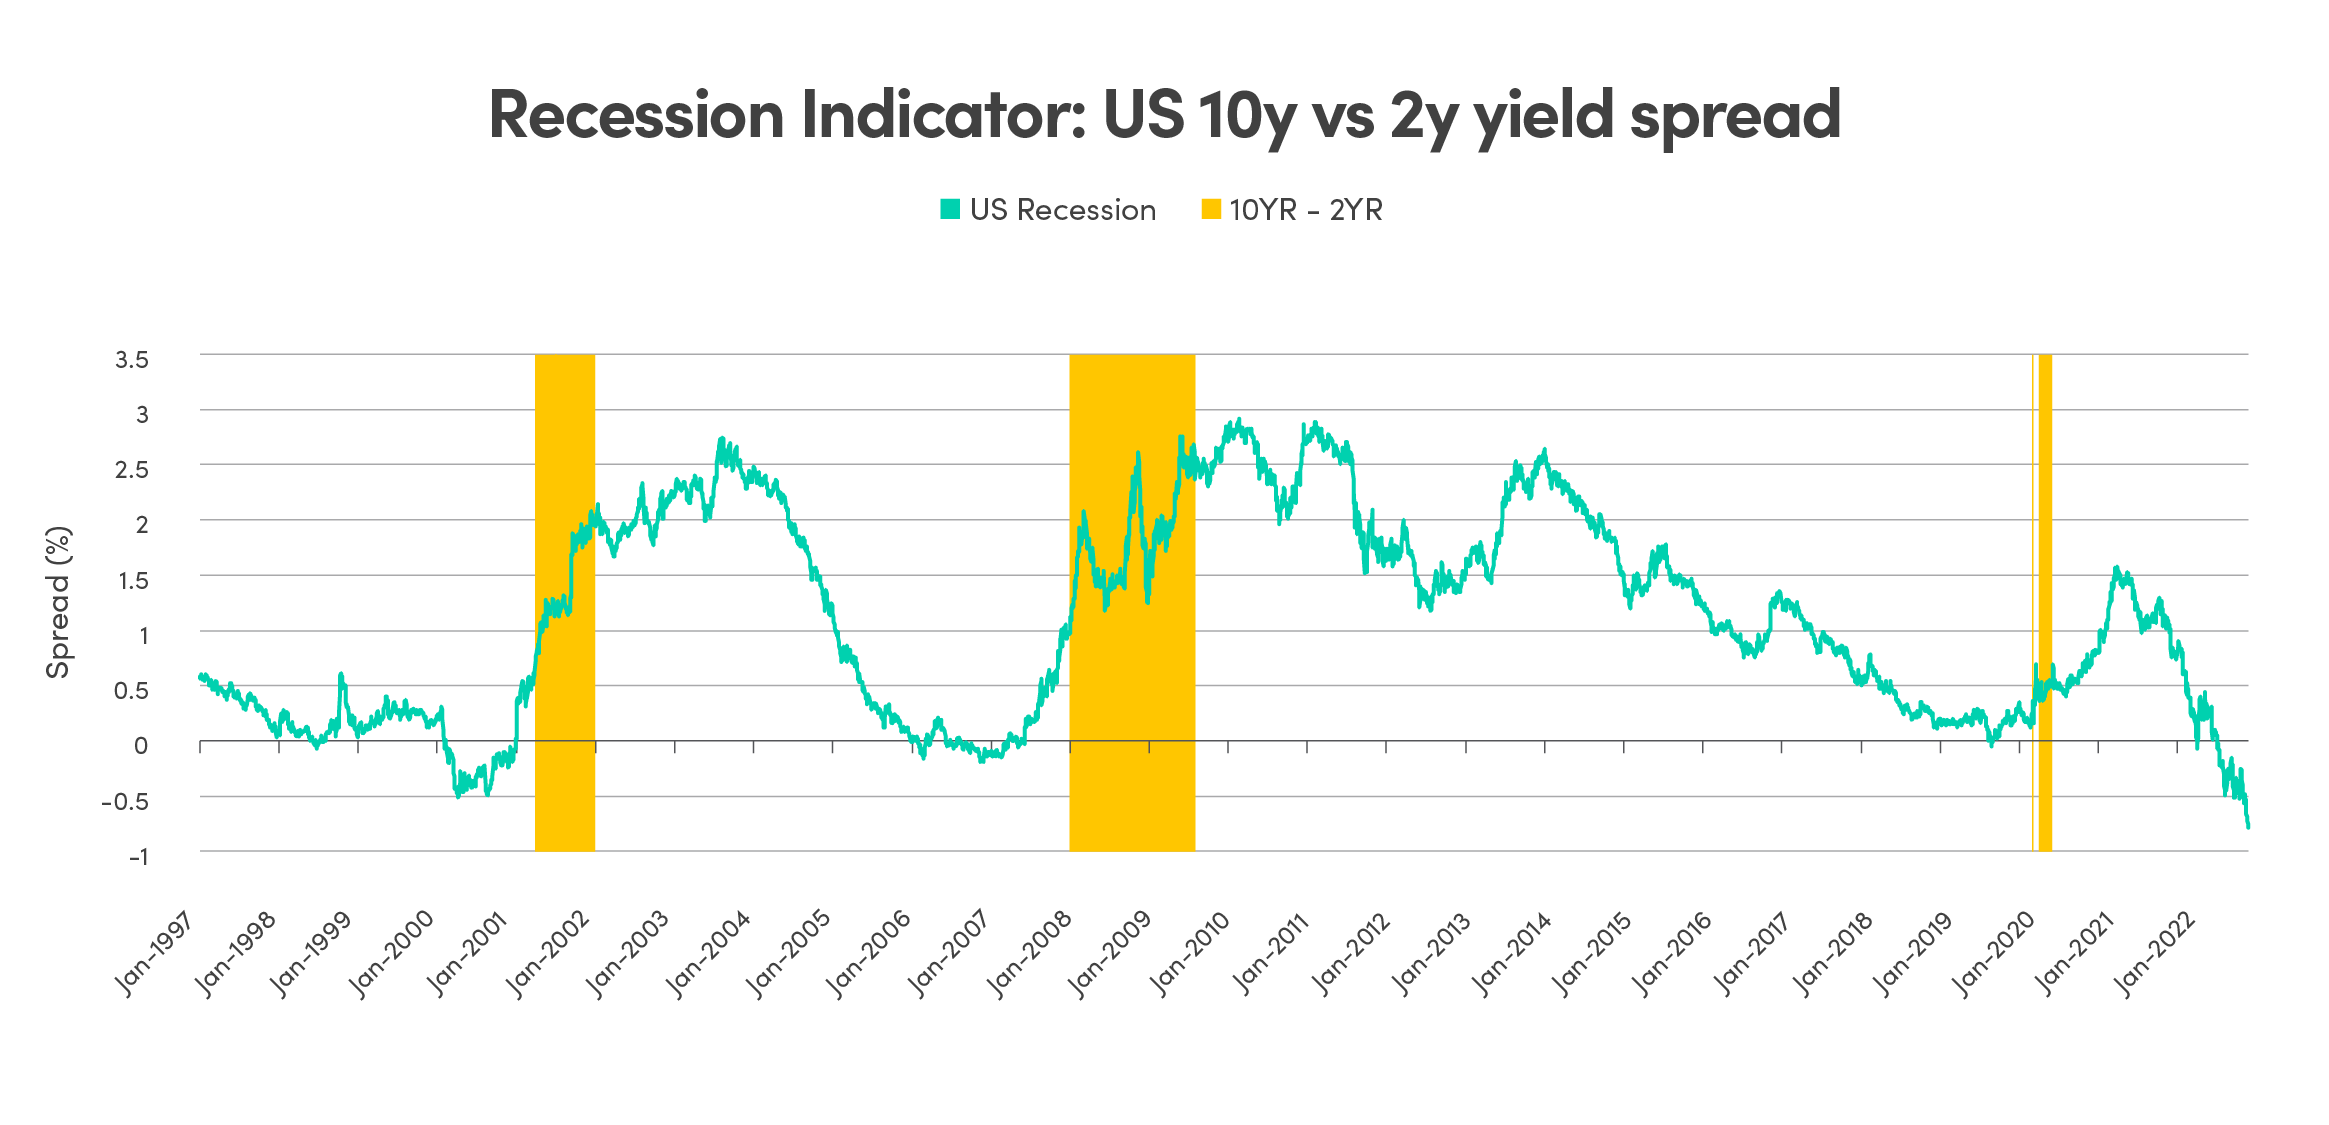 Graph showing the percentage spread between the US 2 year and 10 year treasury yields (a recession indicator) from January 1997 to January 2022